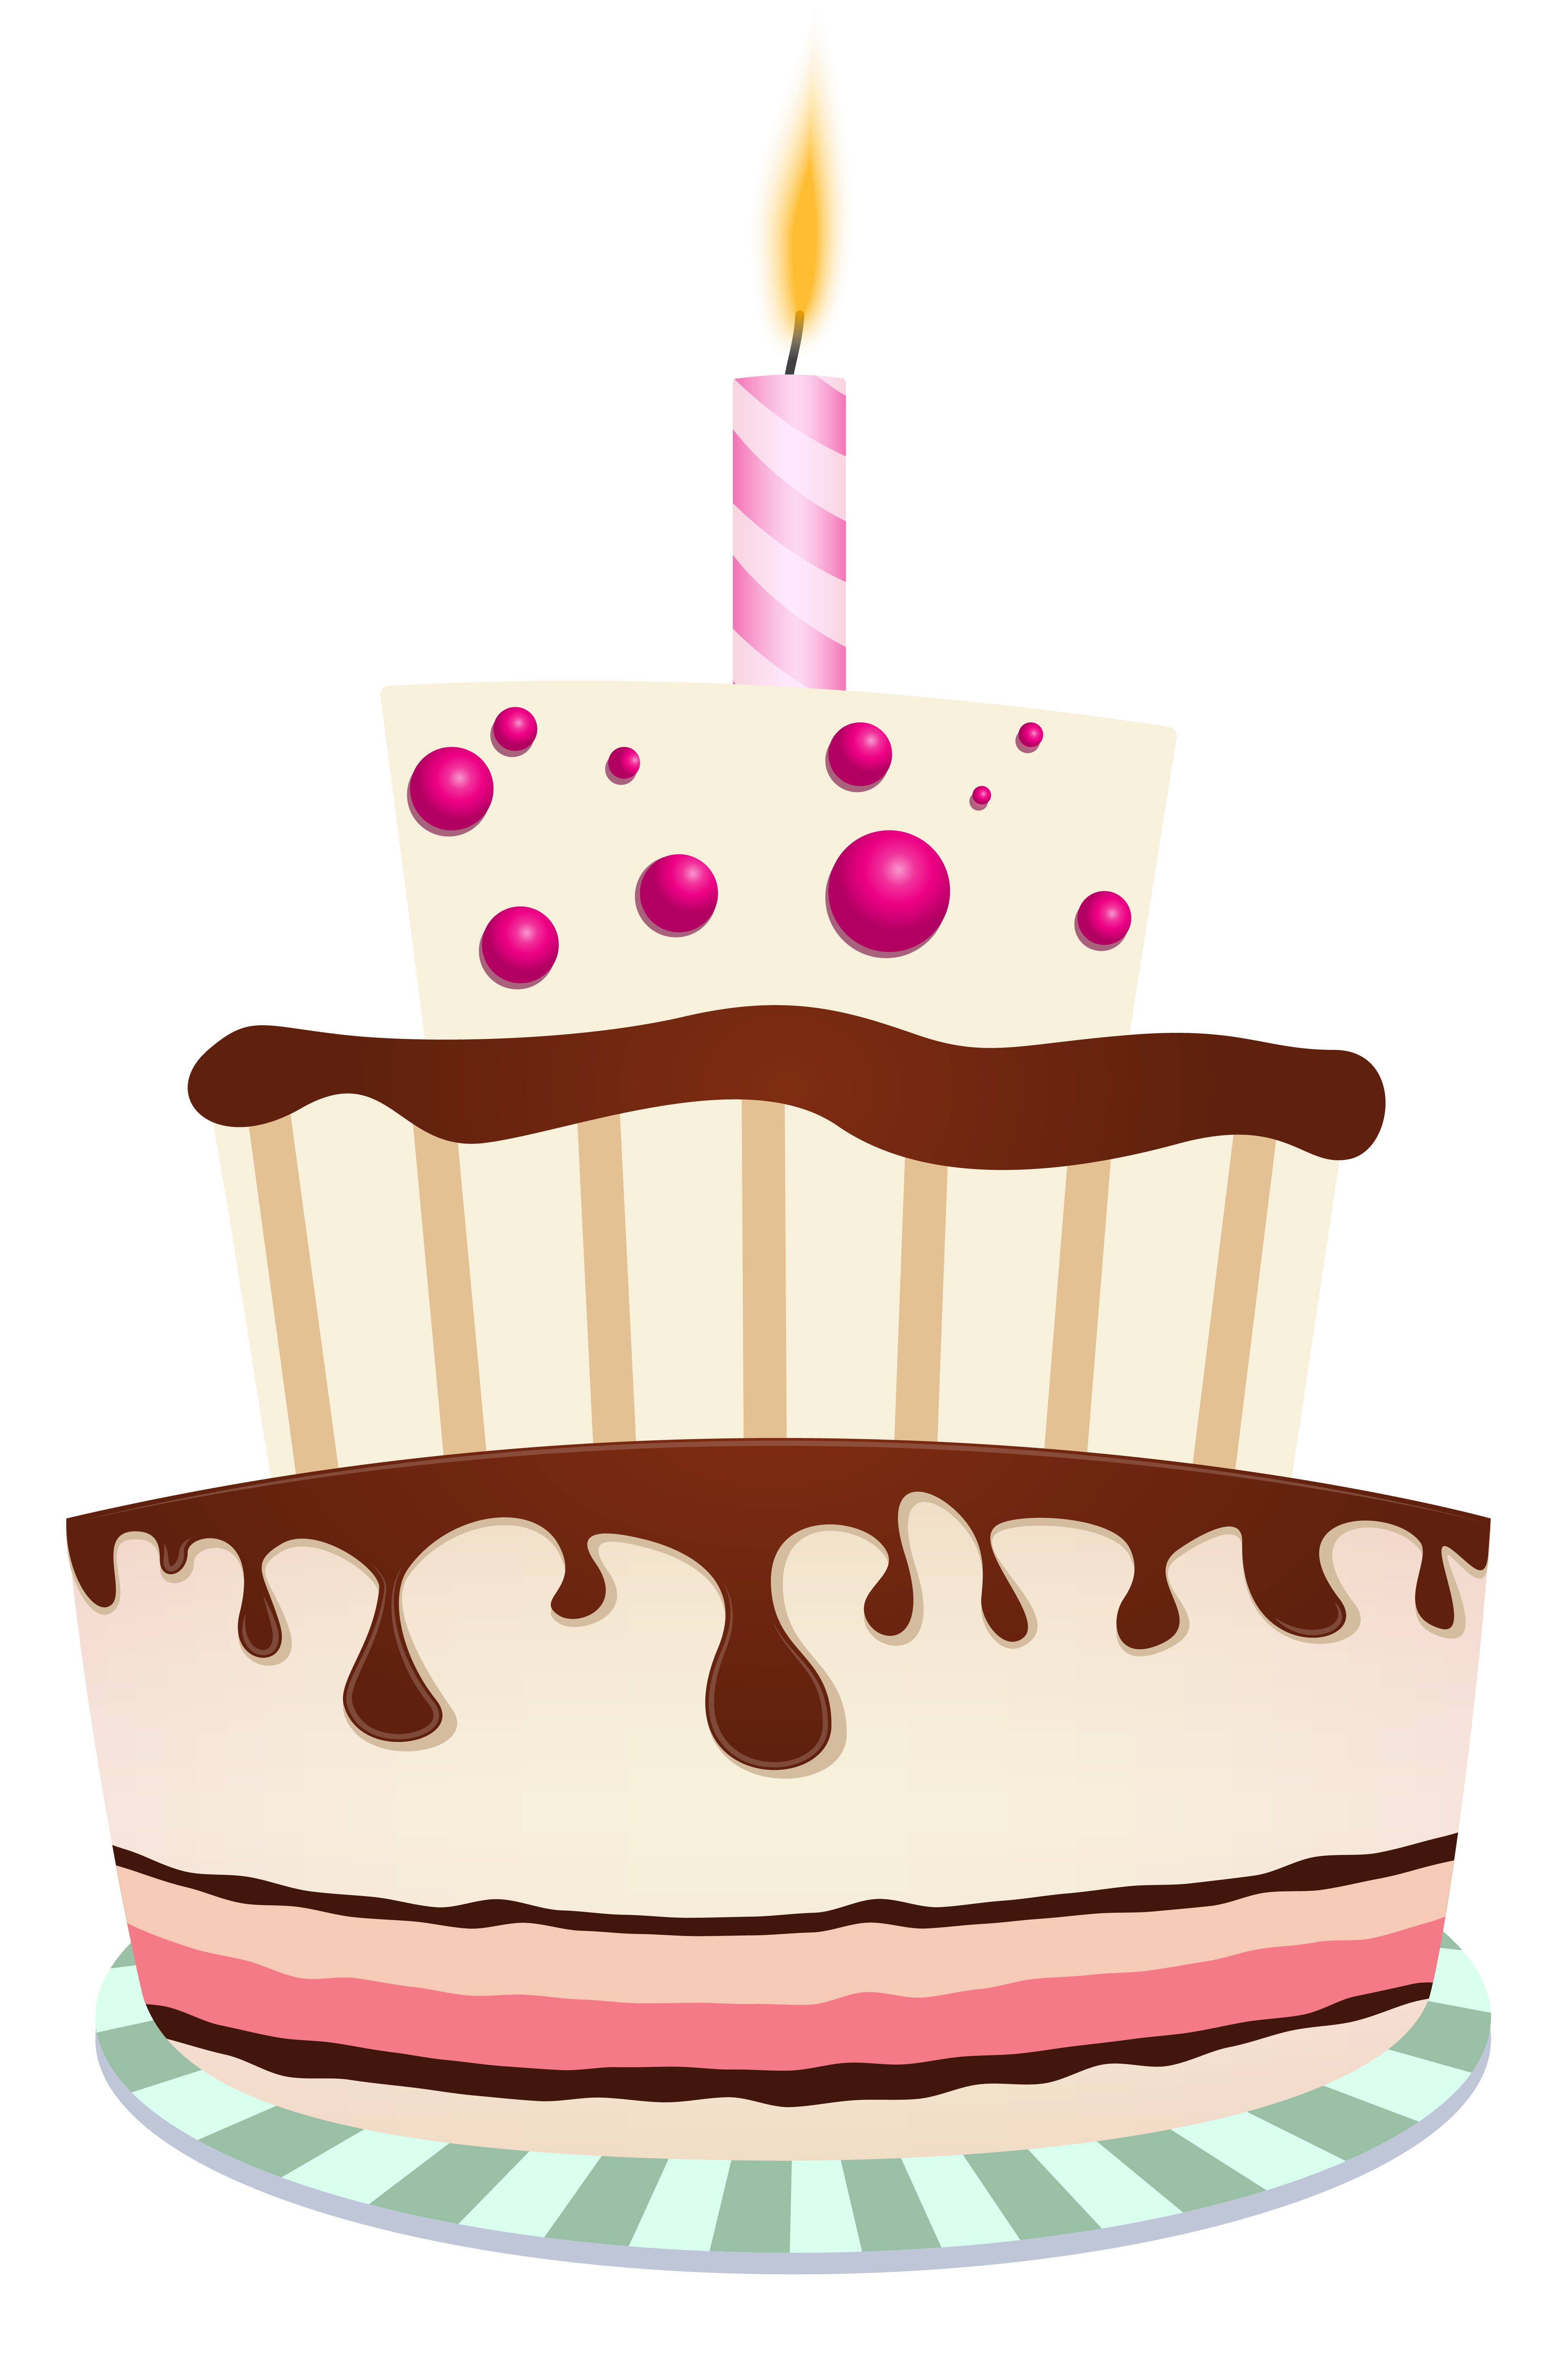 One Birthday Cake Candle Chocolate With PNG Image